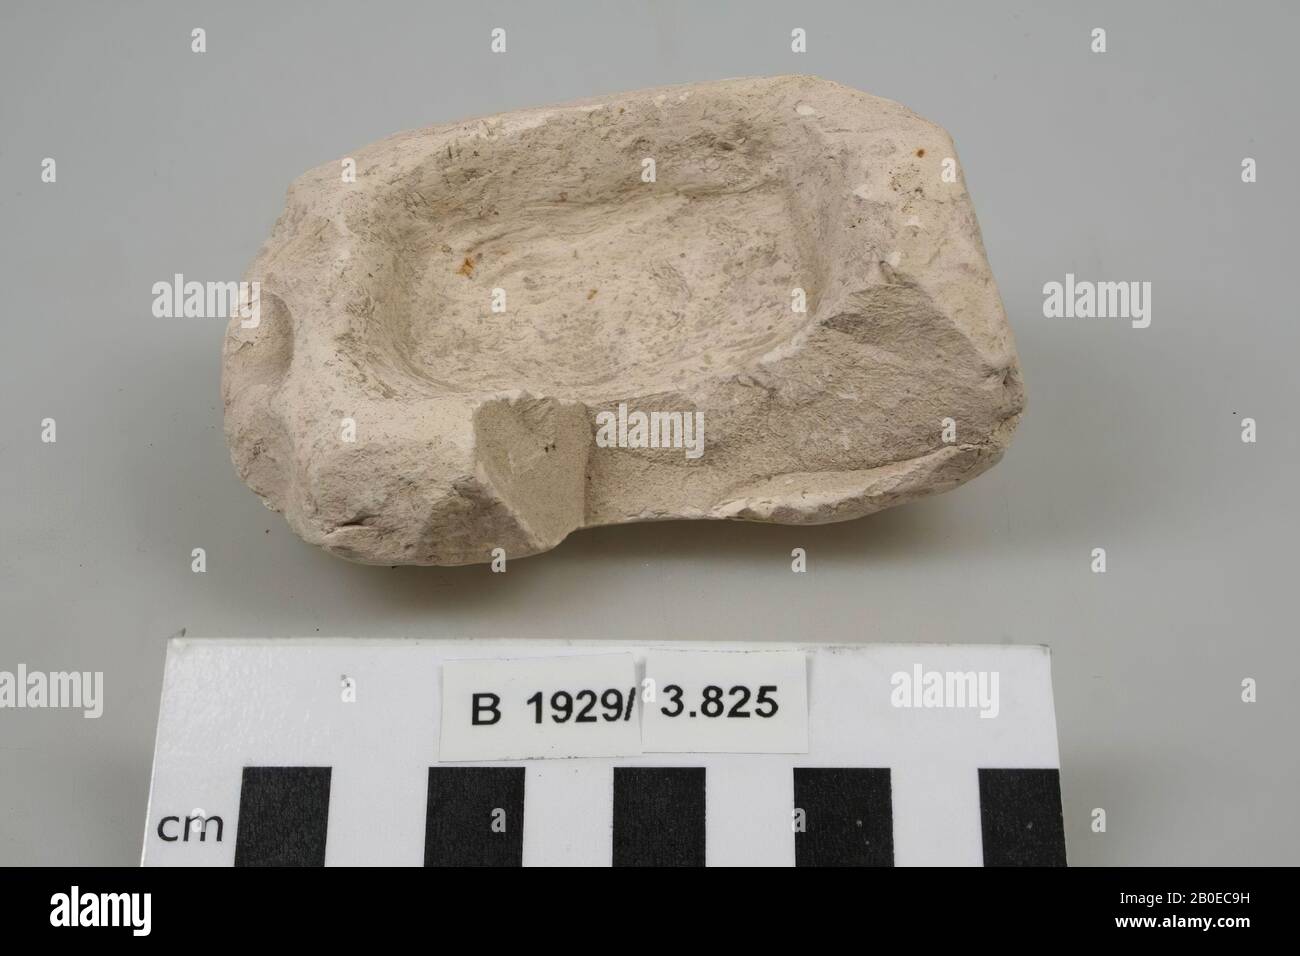 A fragment of a rectangular bowl or mortar, roughly made of limestone. Especially the outside shows irregularities, grindstone, crockery, stone, limestone, L 10.3 cm, W 7.5 cm, H 4.7 cm, Palestine Stock Photo